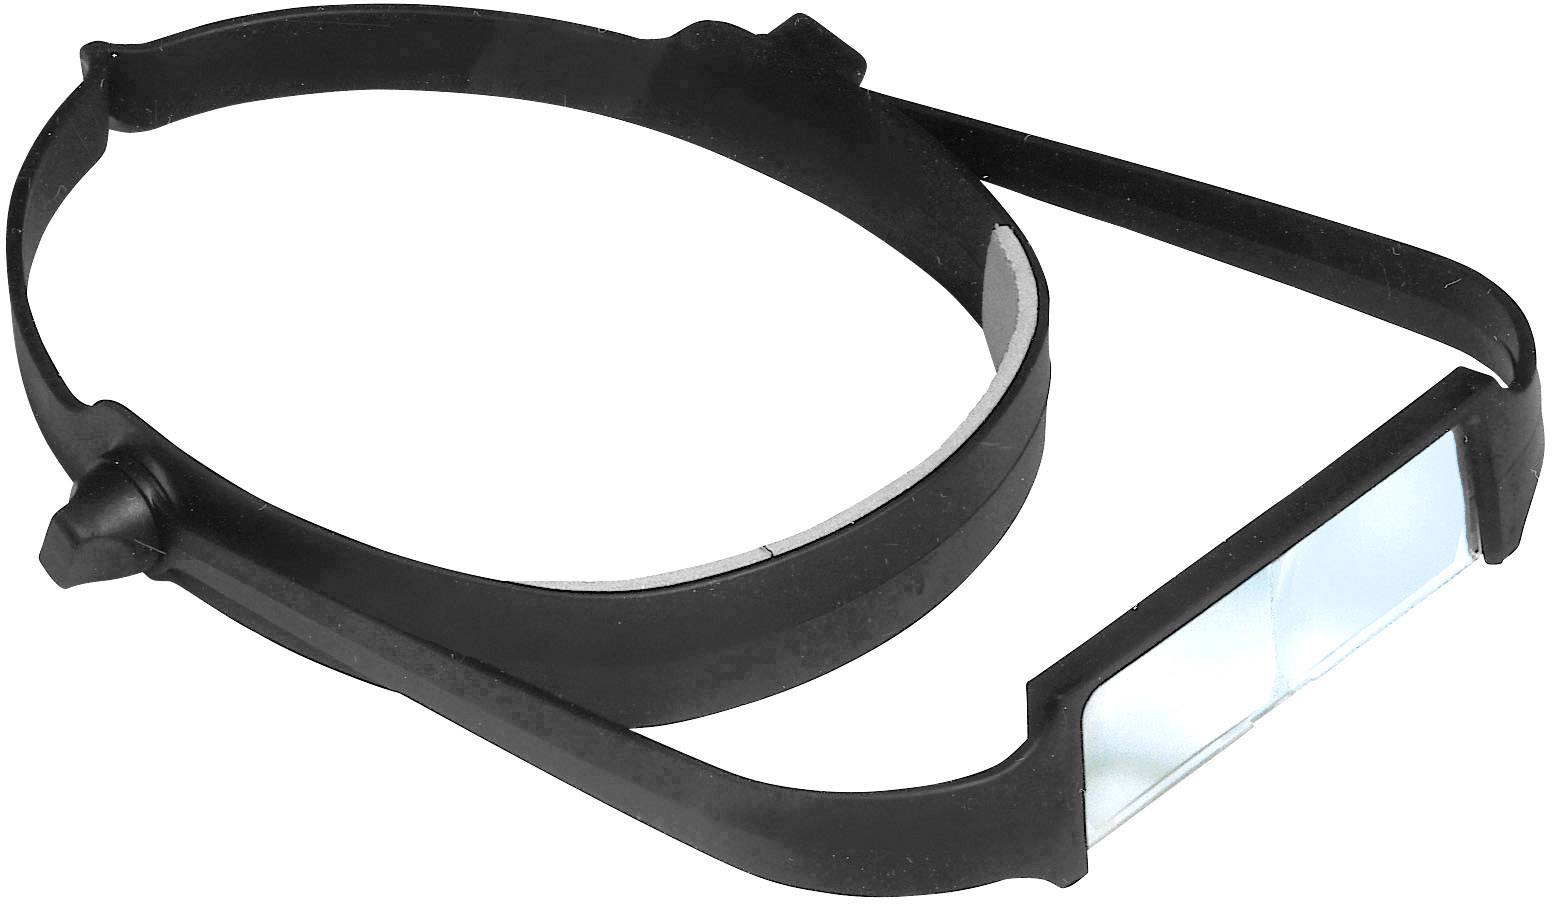 YHD Loupe frontale Loupe frontale réglable Loupe frontale Grossissement 4 grossissements 1,5 x 2 x 2,5 x 3,5 x